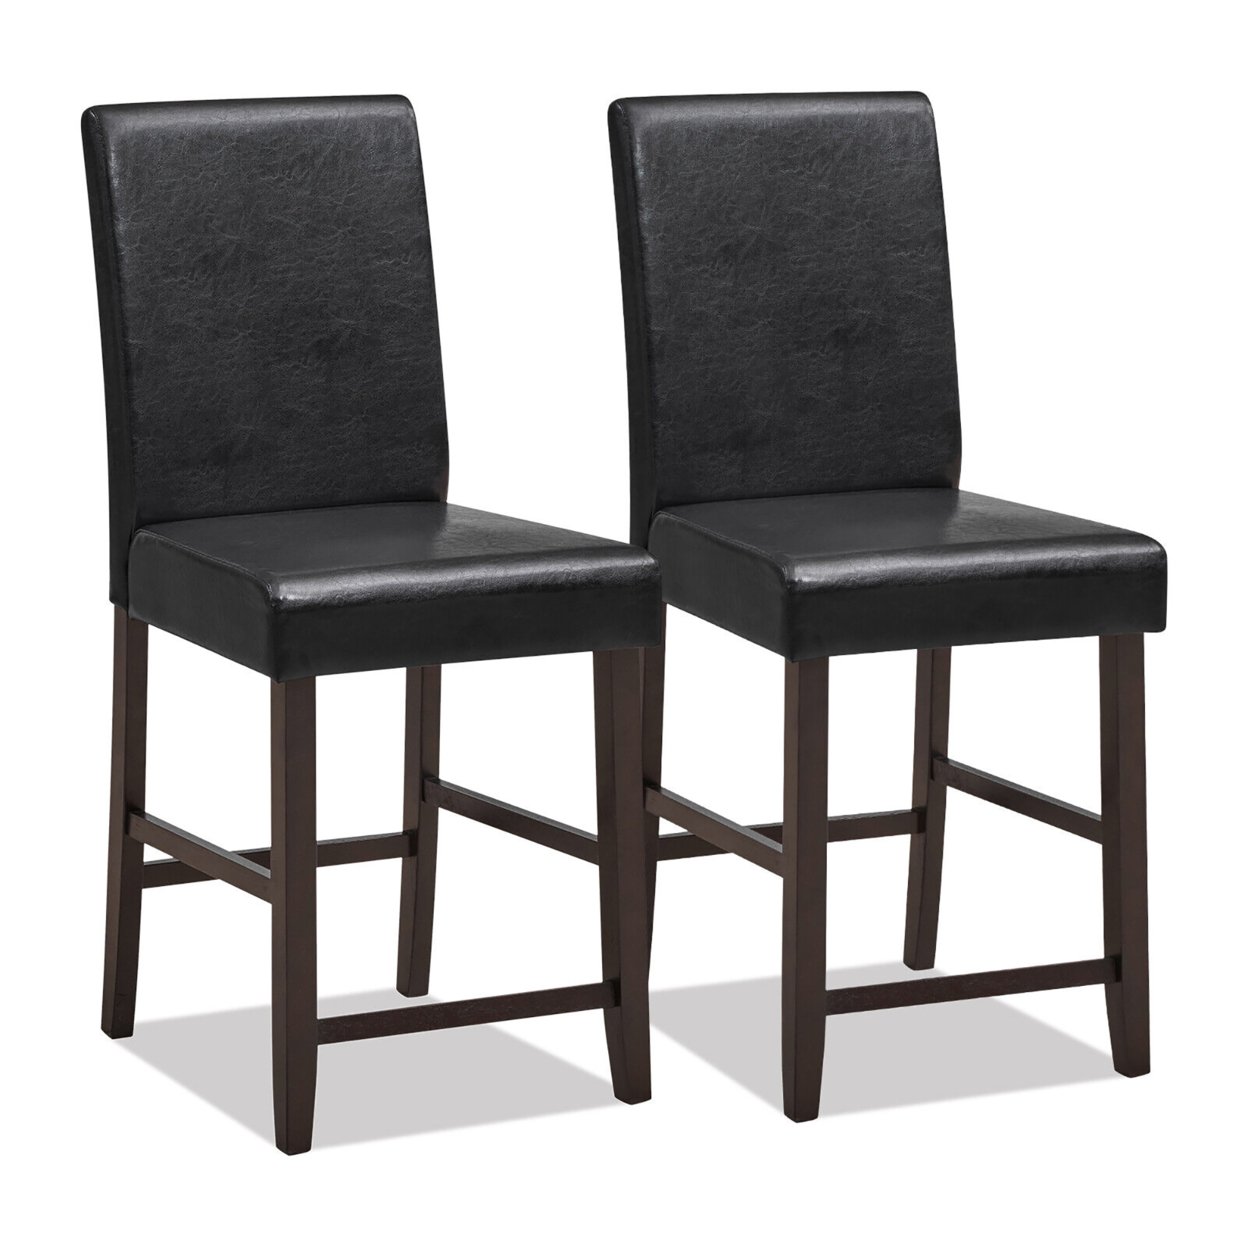 Set Of 2 Bar Stools 24'' Counter Height Pub Kitchen Chairs W/ Rubber Wood Legs